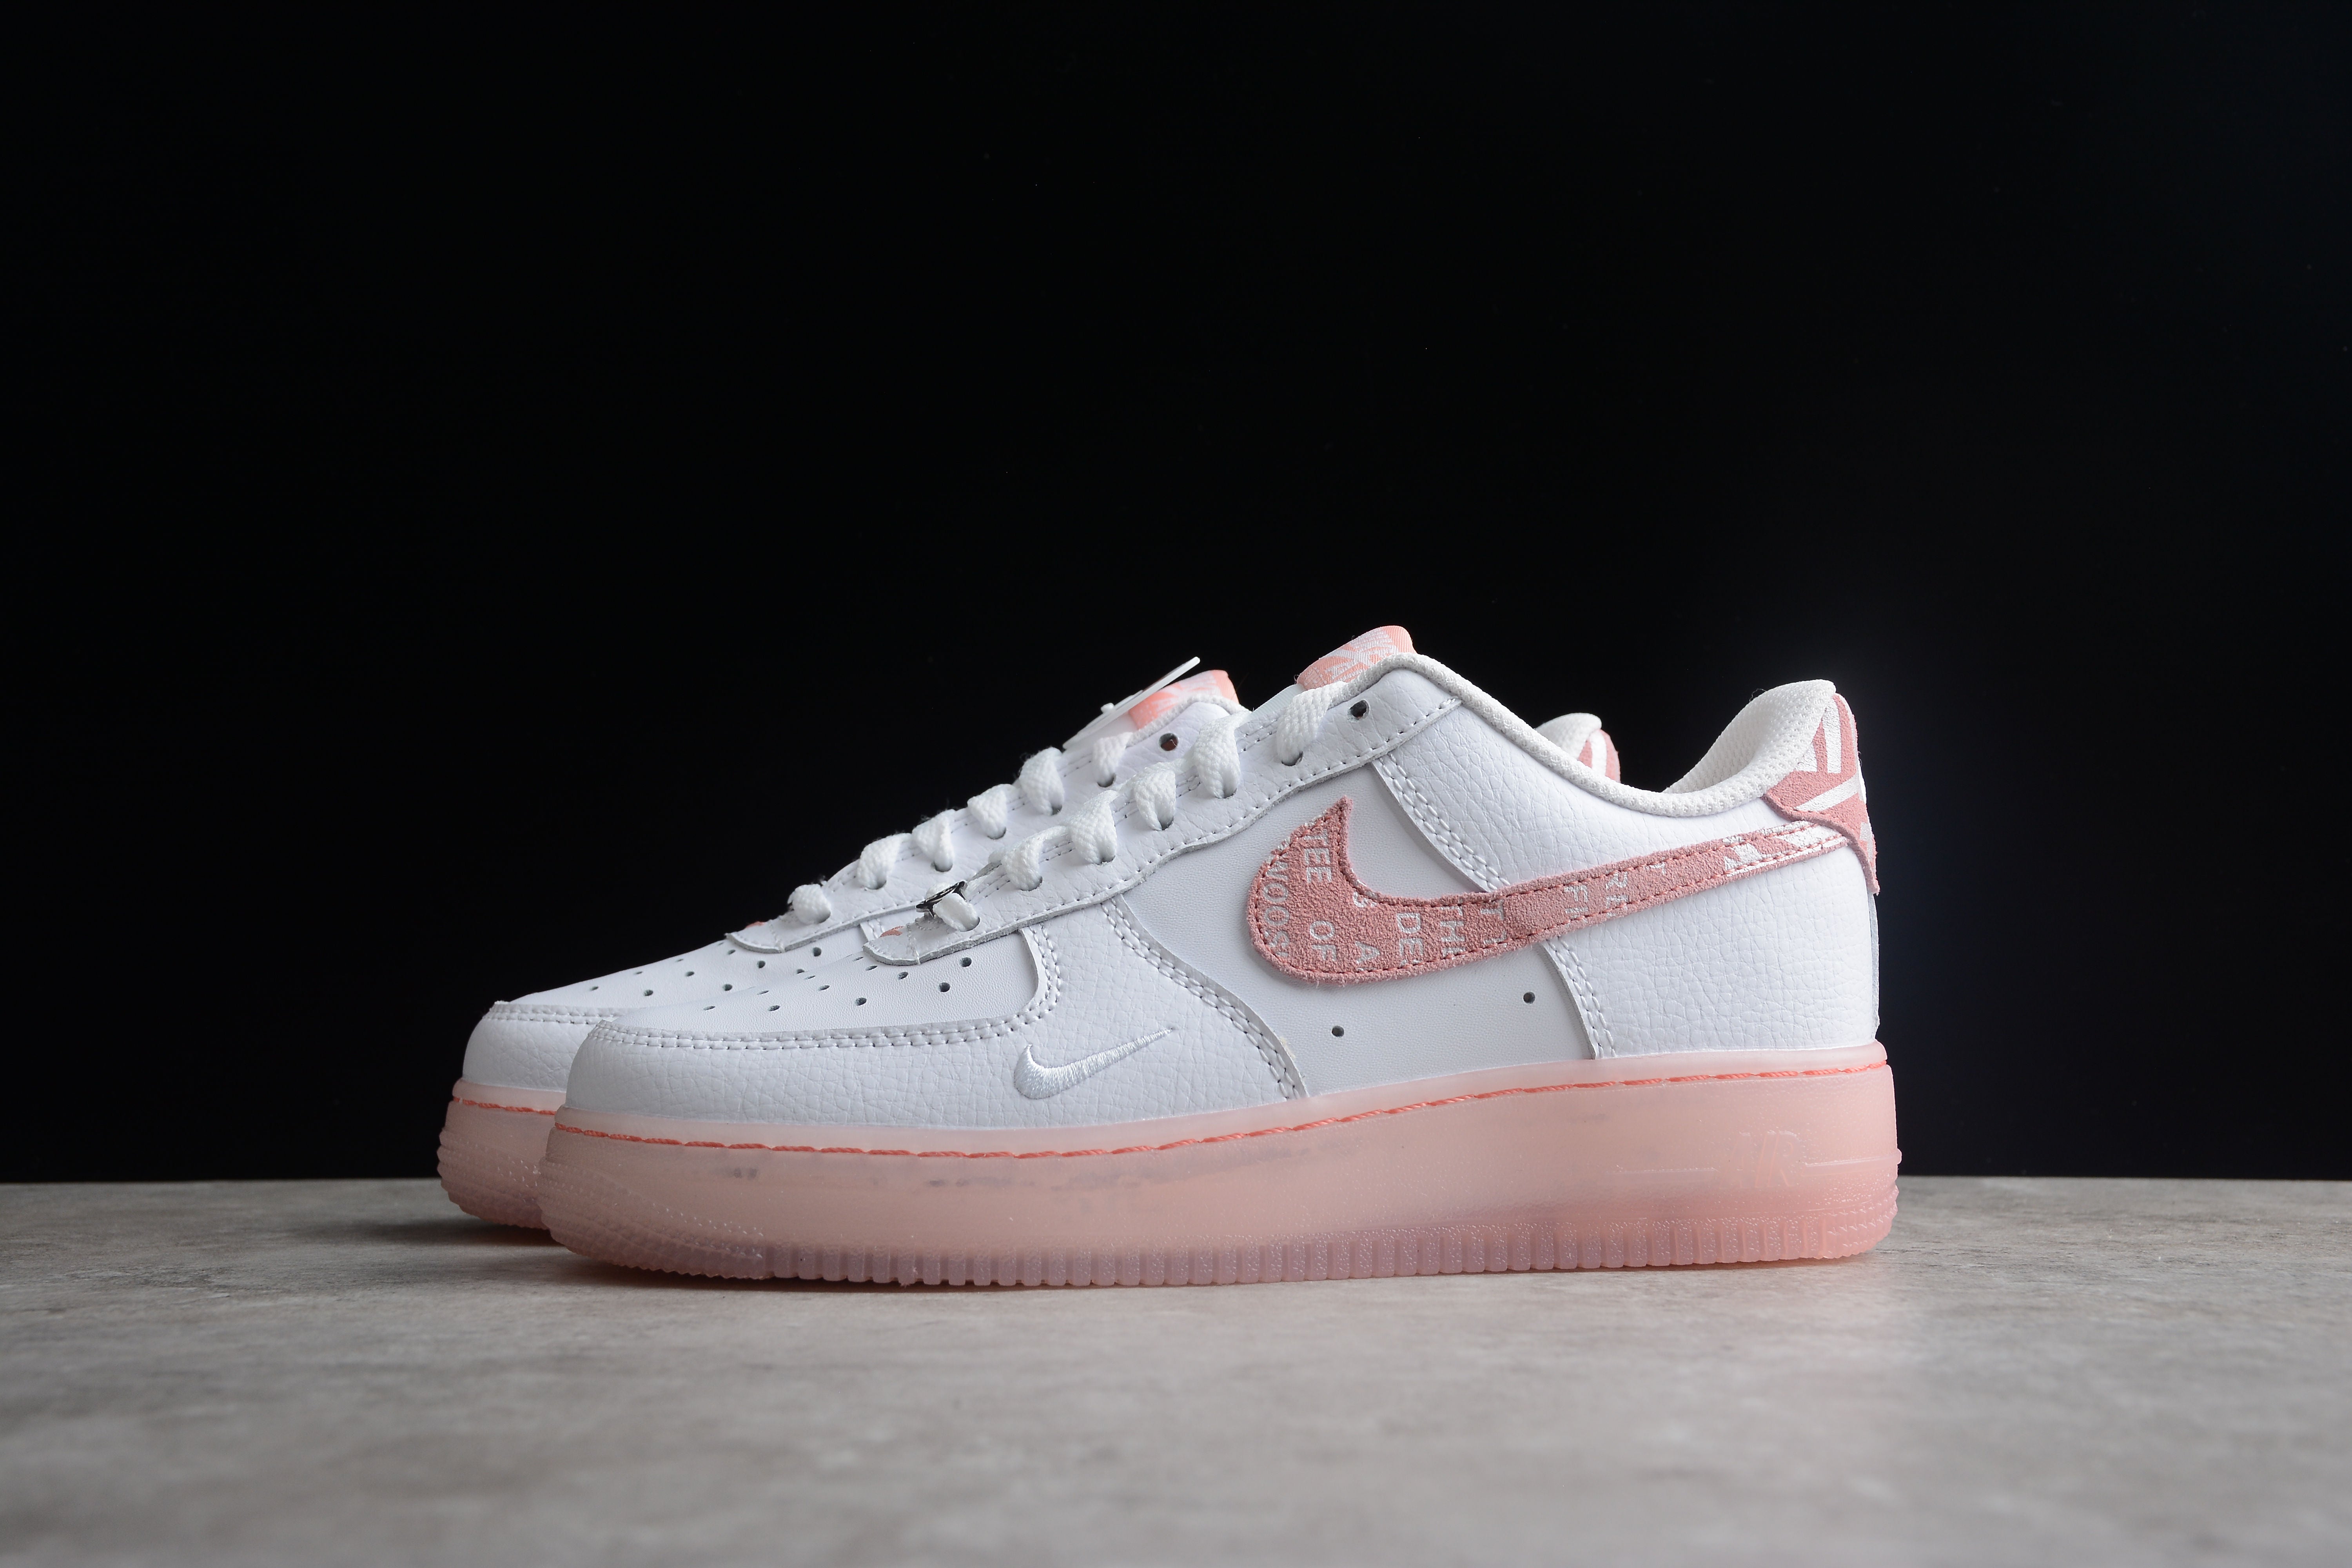 Nike airforce A1 pinkish shoes